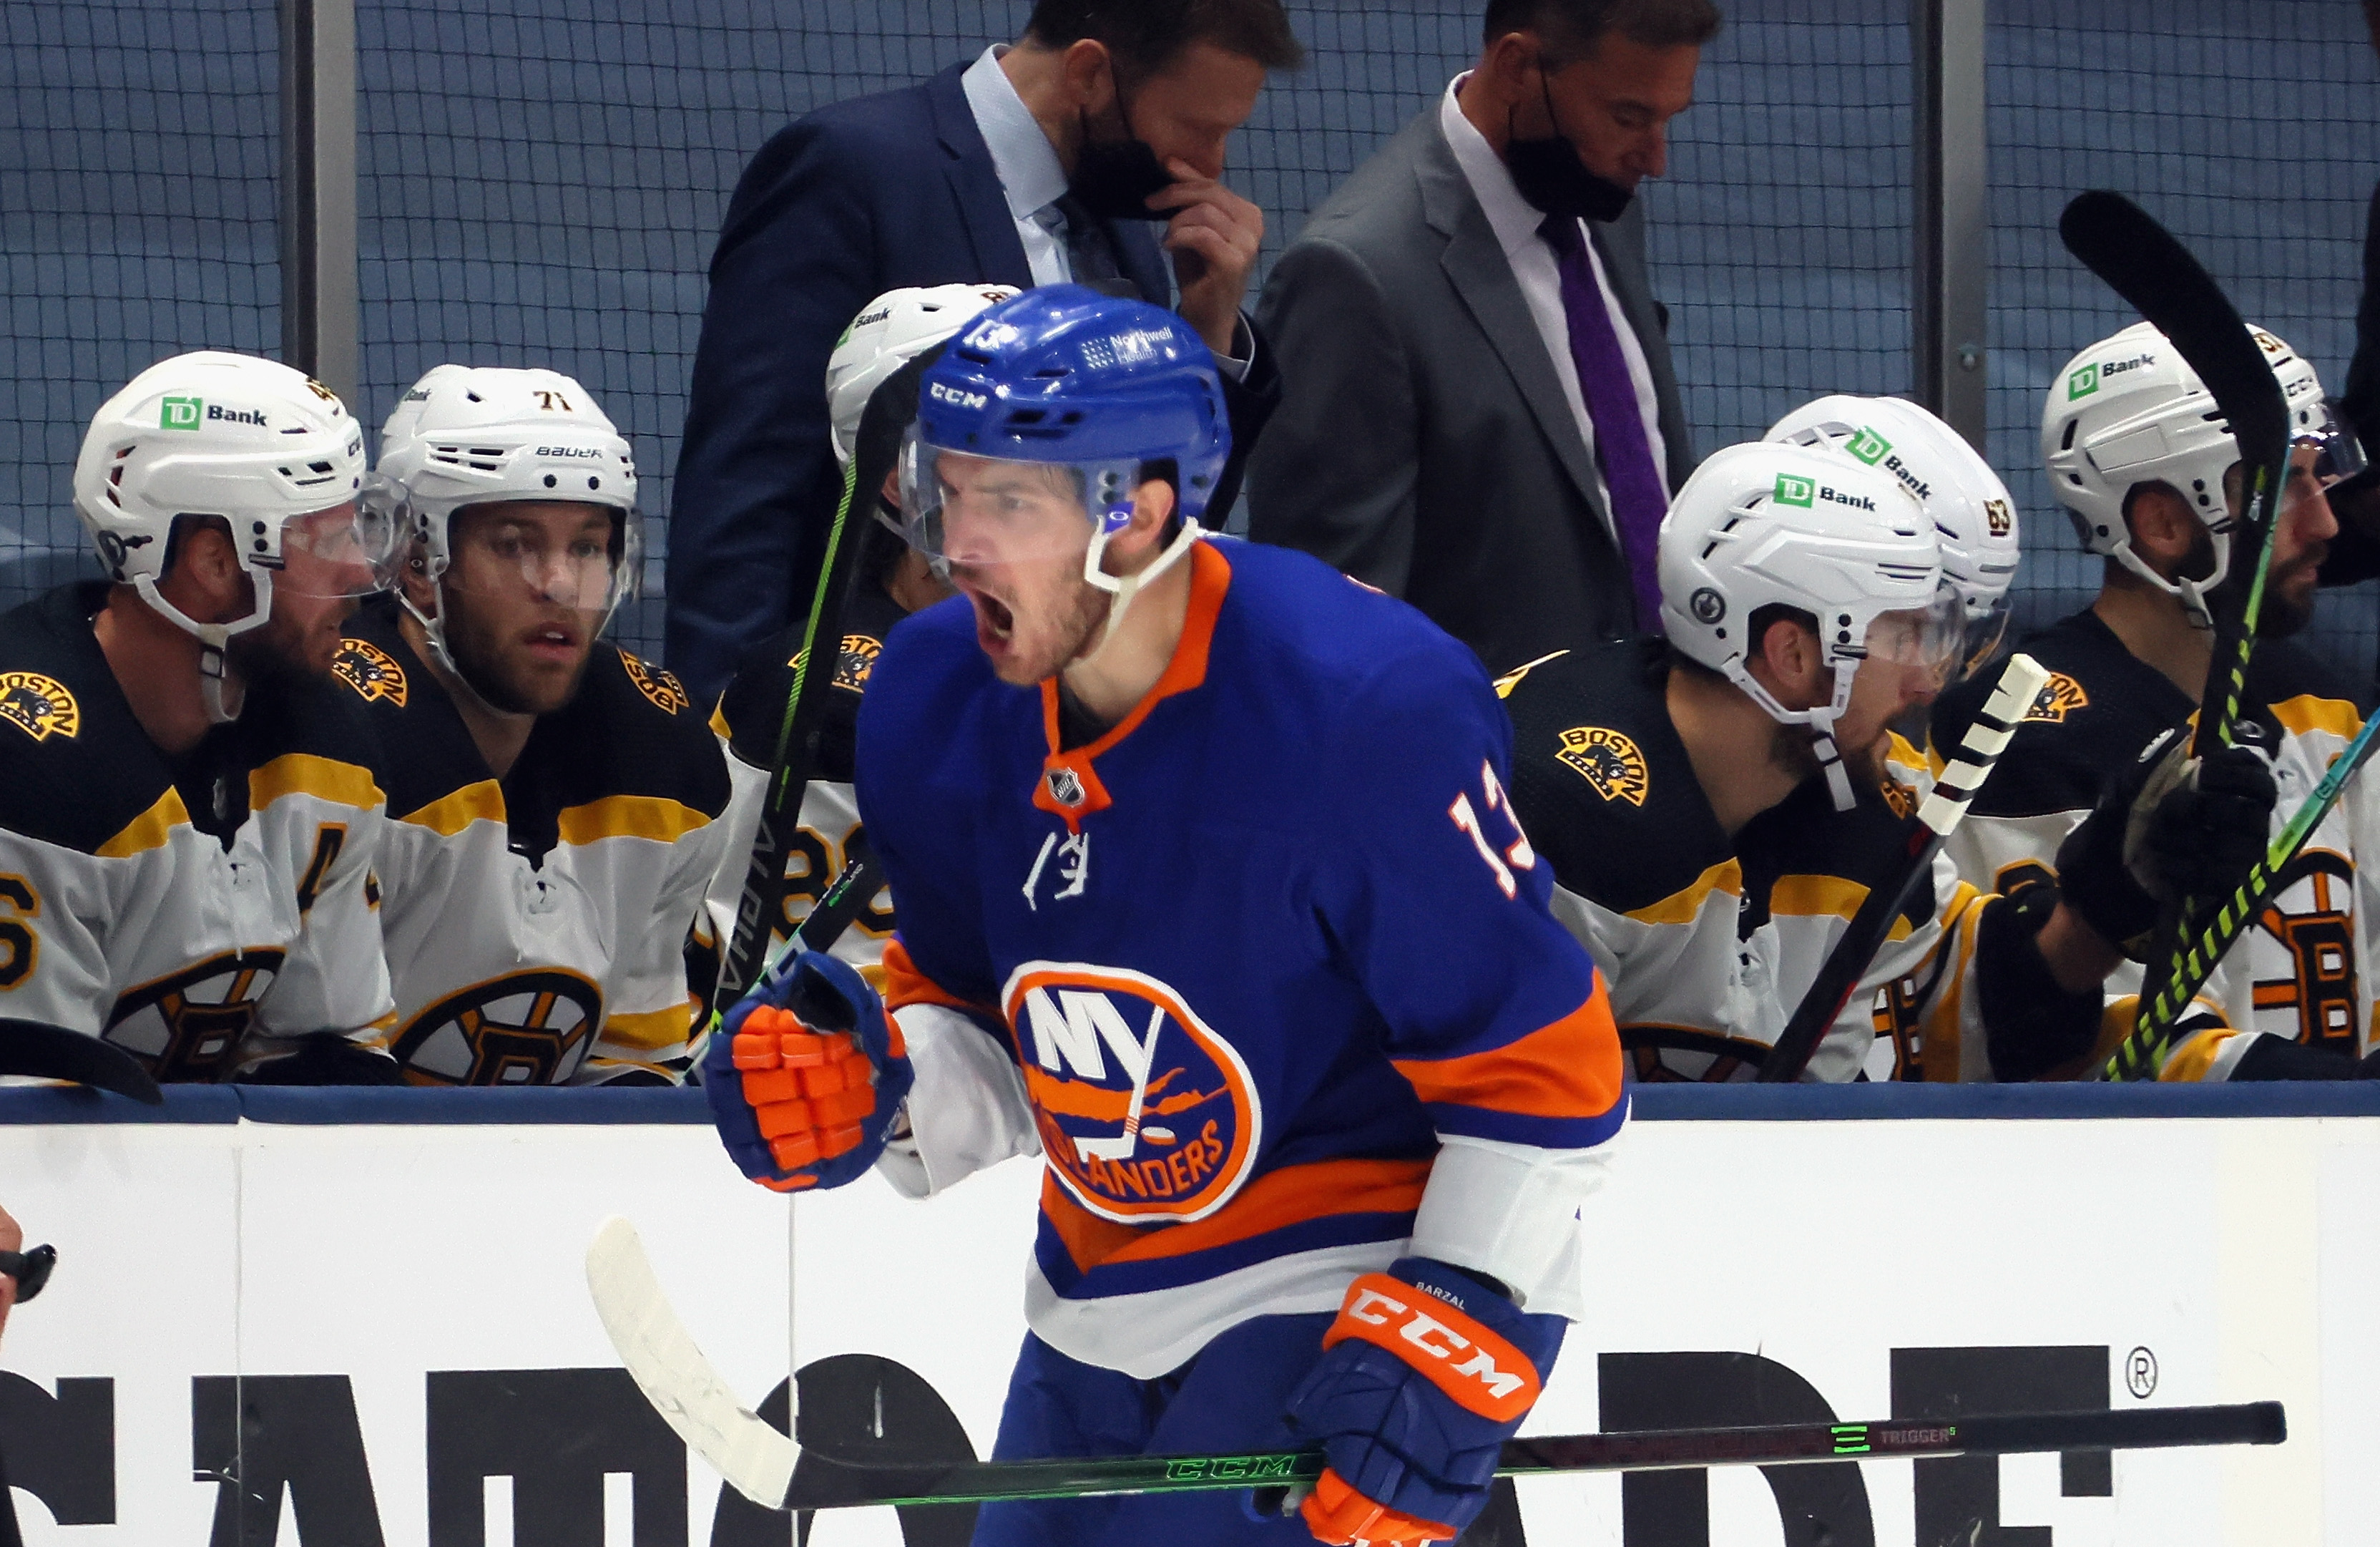 The Bruins Had Better Watch Out For The Islanders Mathew Barzal After The Way He Stepped Up In Game 4 The Boston Globe